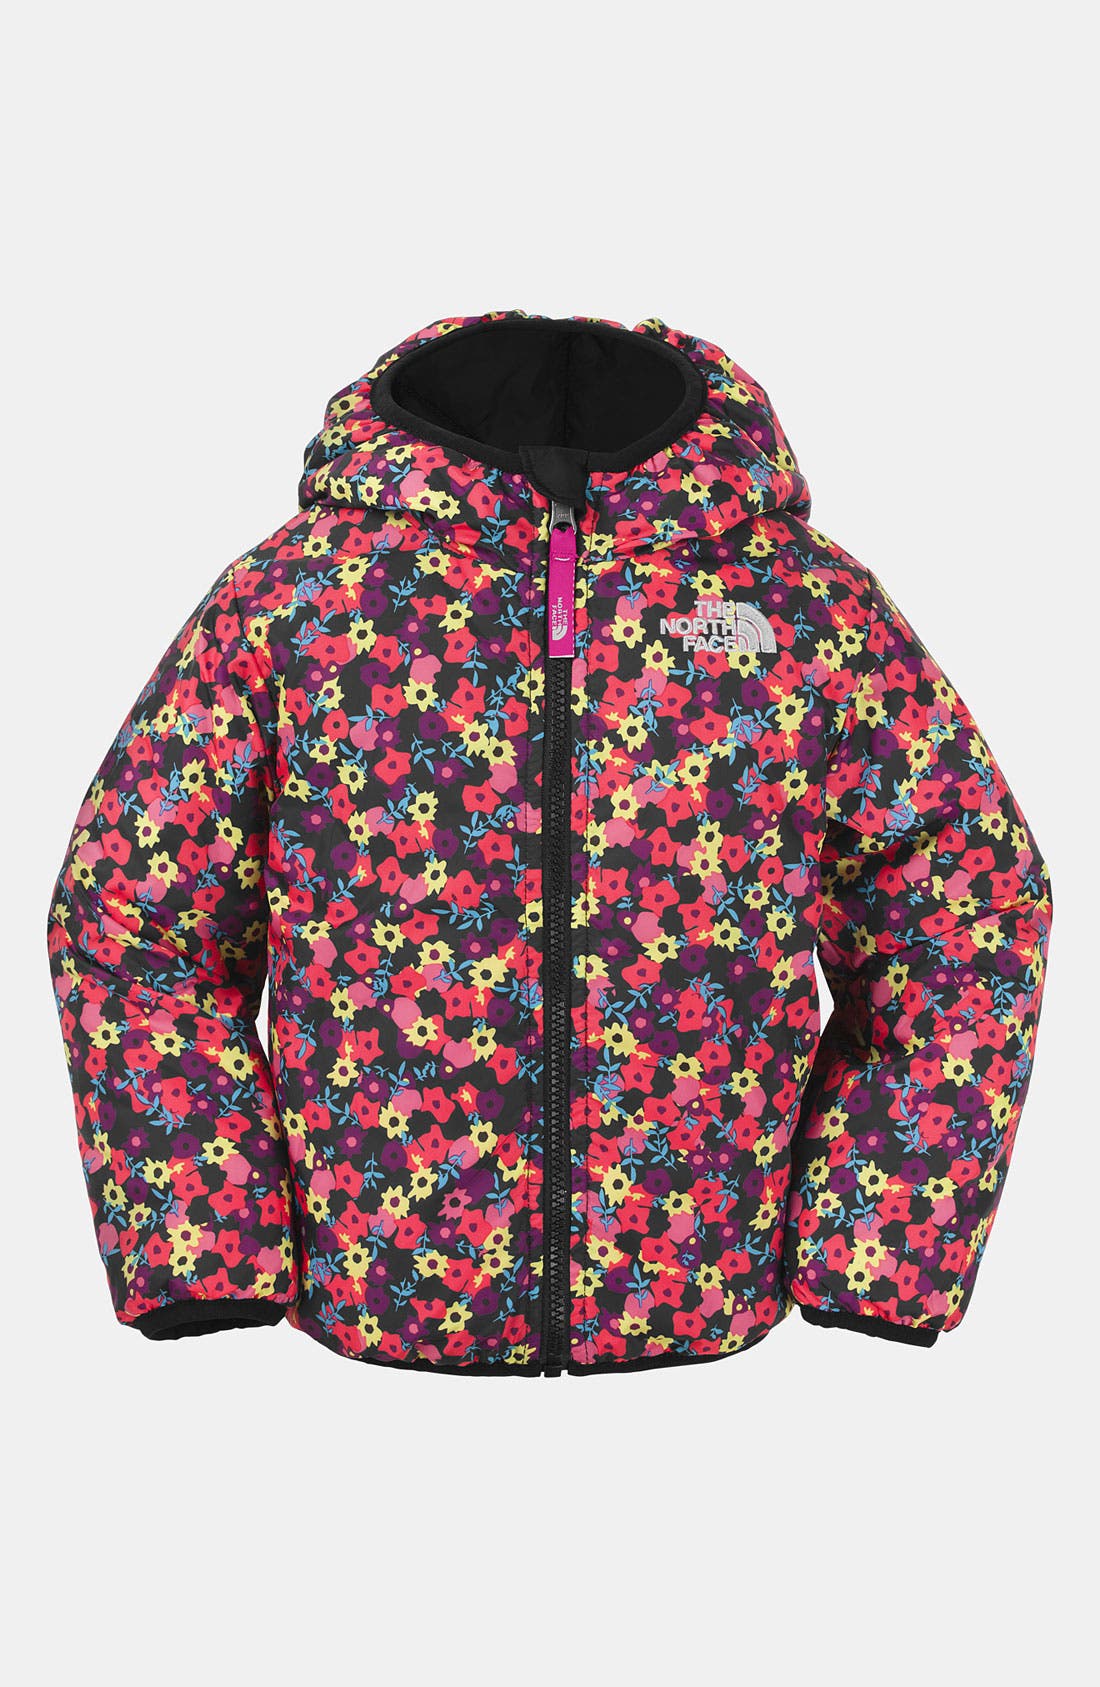 north face toddler puffer jacket